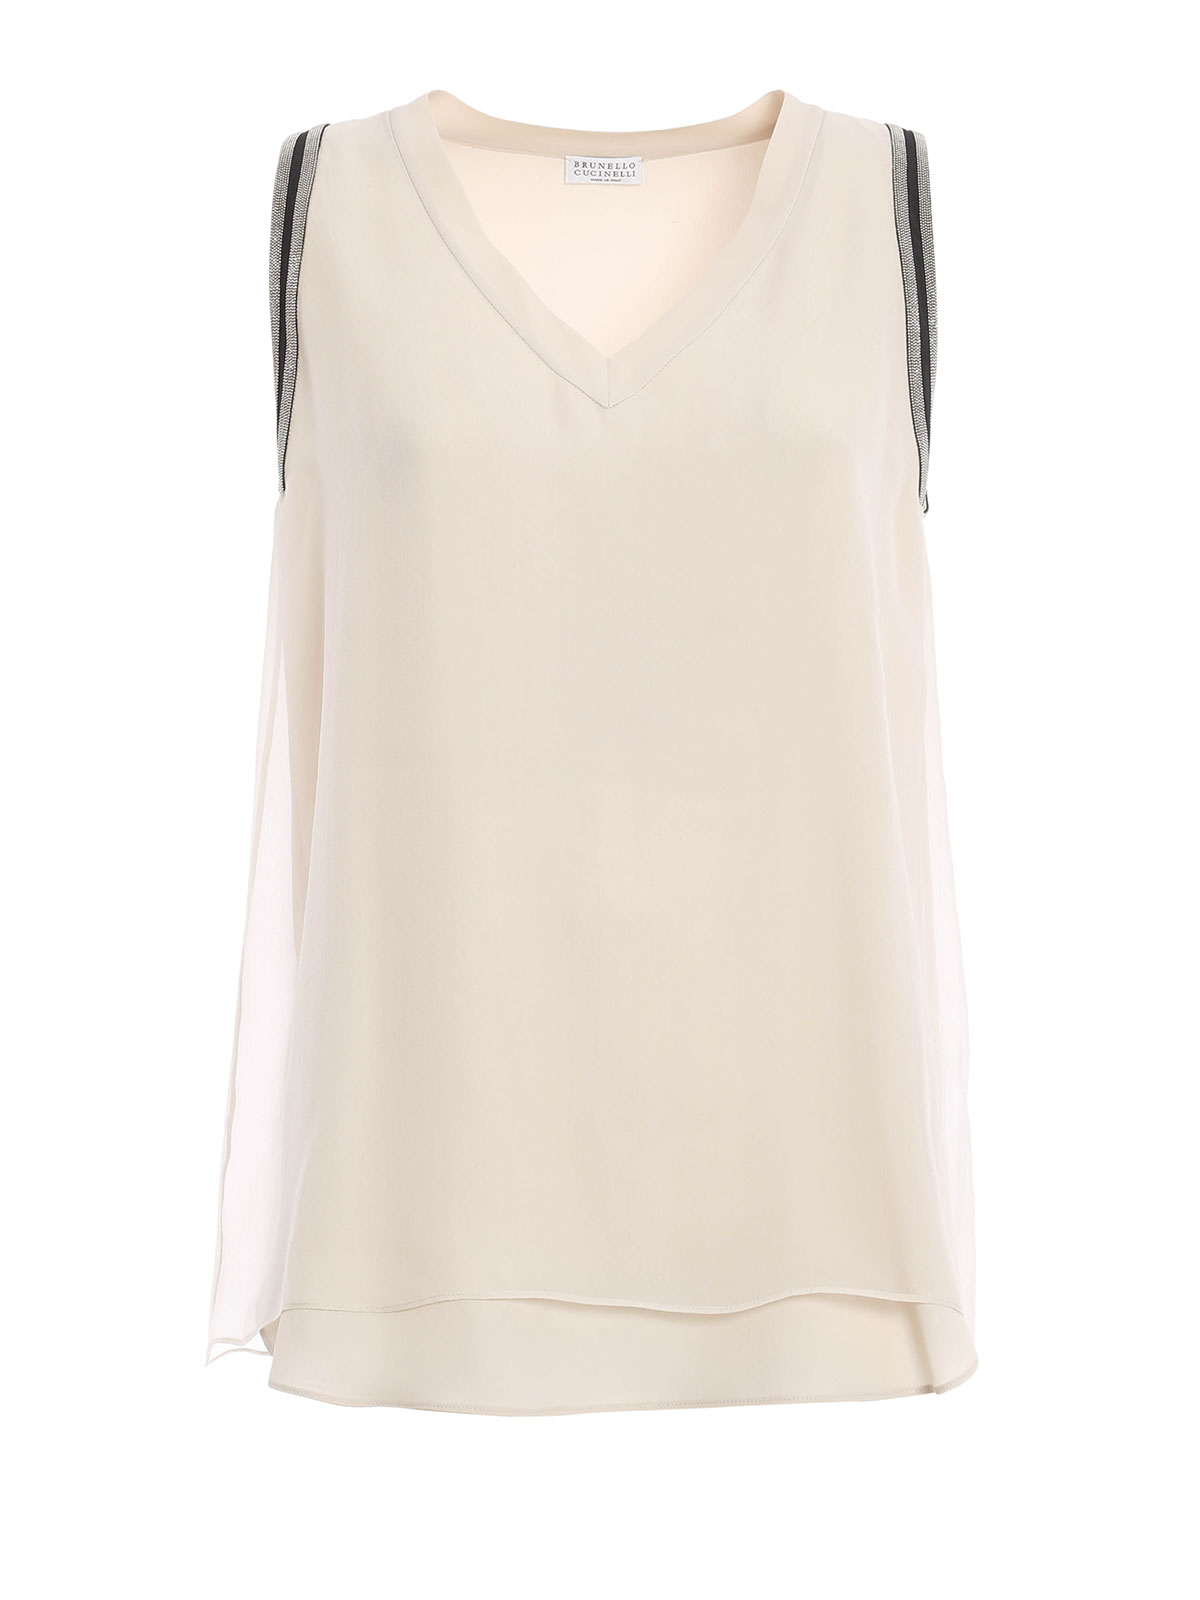 https://images.thebestshops.com/product_images/original/brunello-cucinelli-tops--tank-tops-brass-detailed-silk-tank-top-00000065740f00s031.jpg